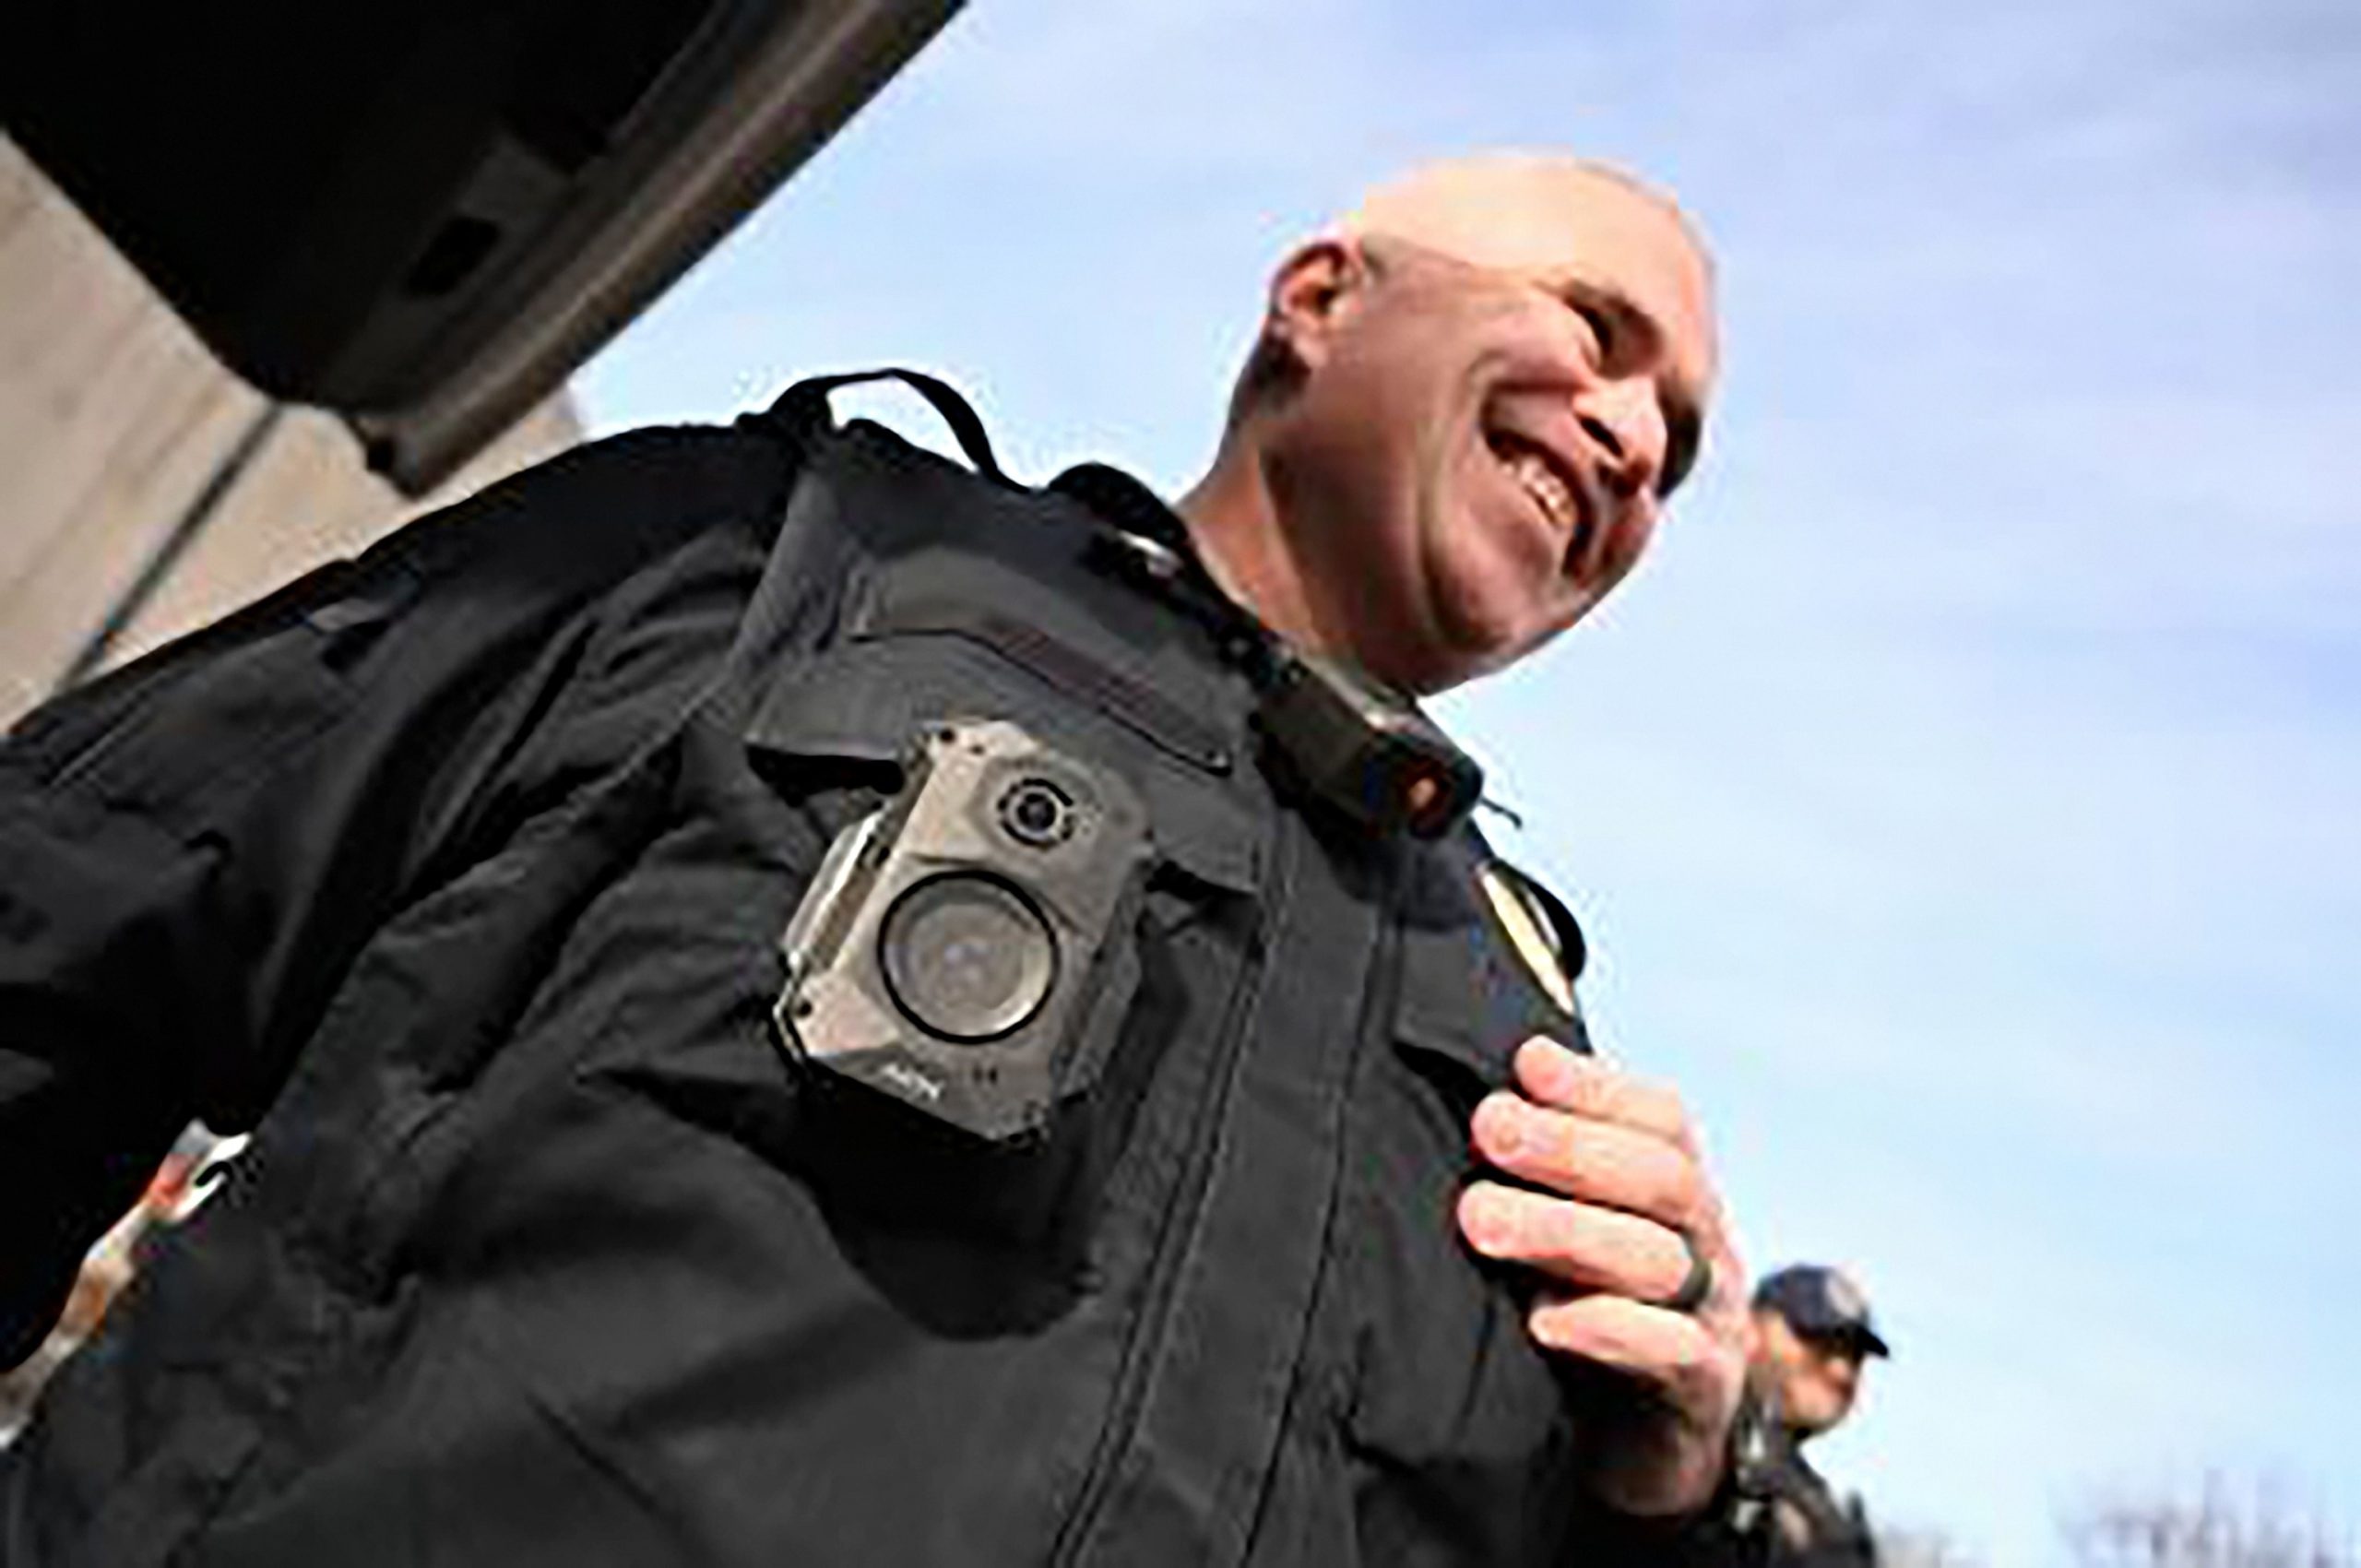 Capitol Police implement body cameras in pilot program to enhance transparency and public trust